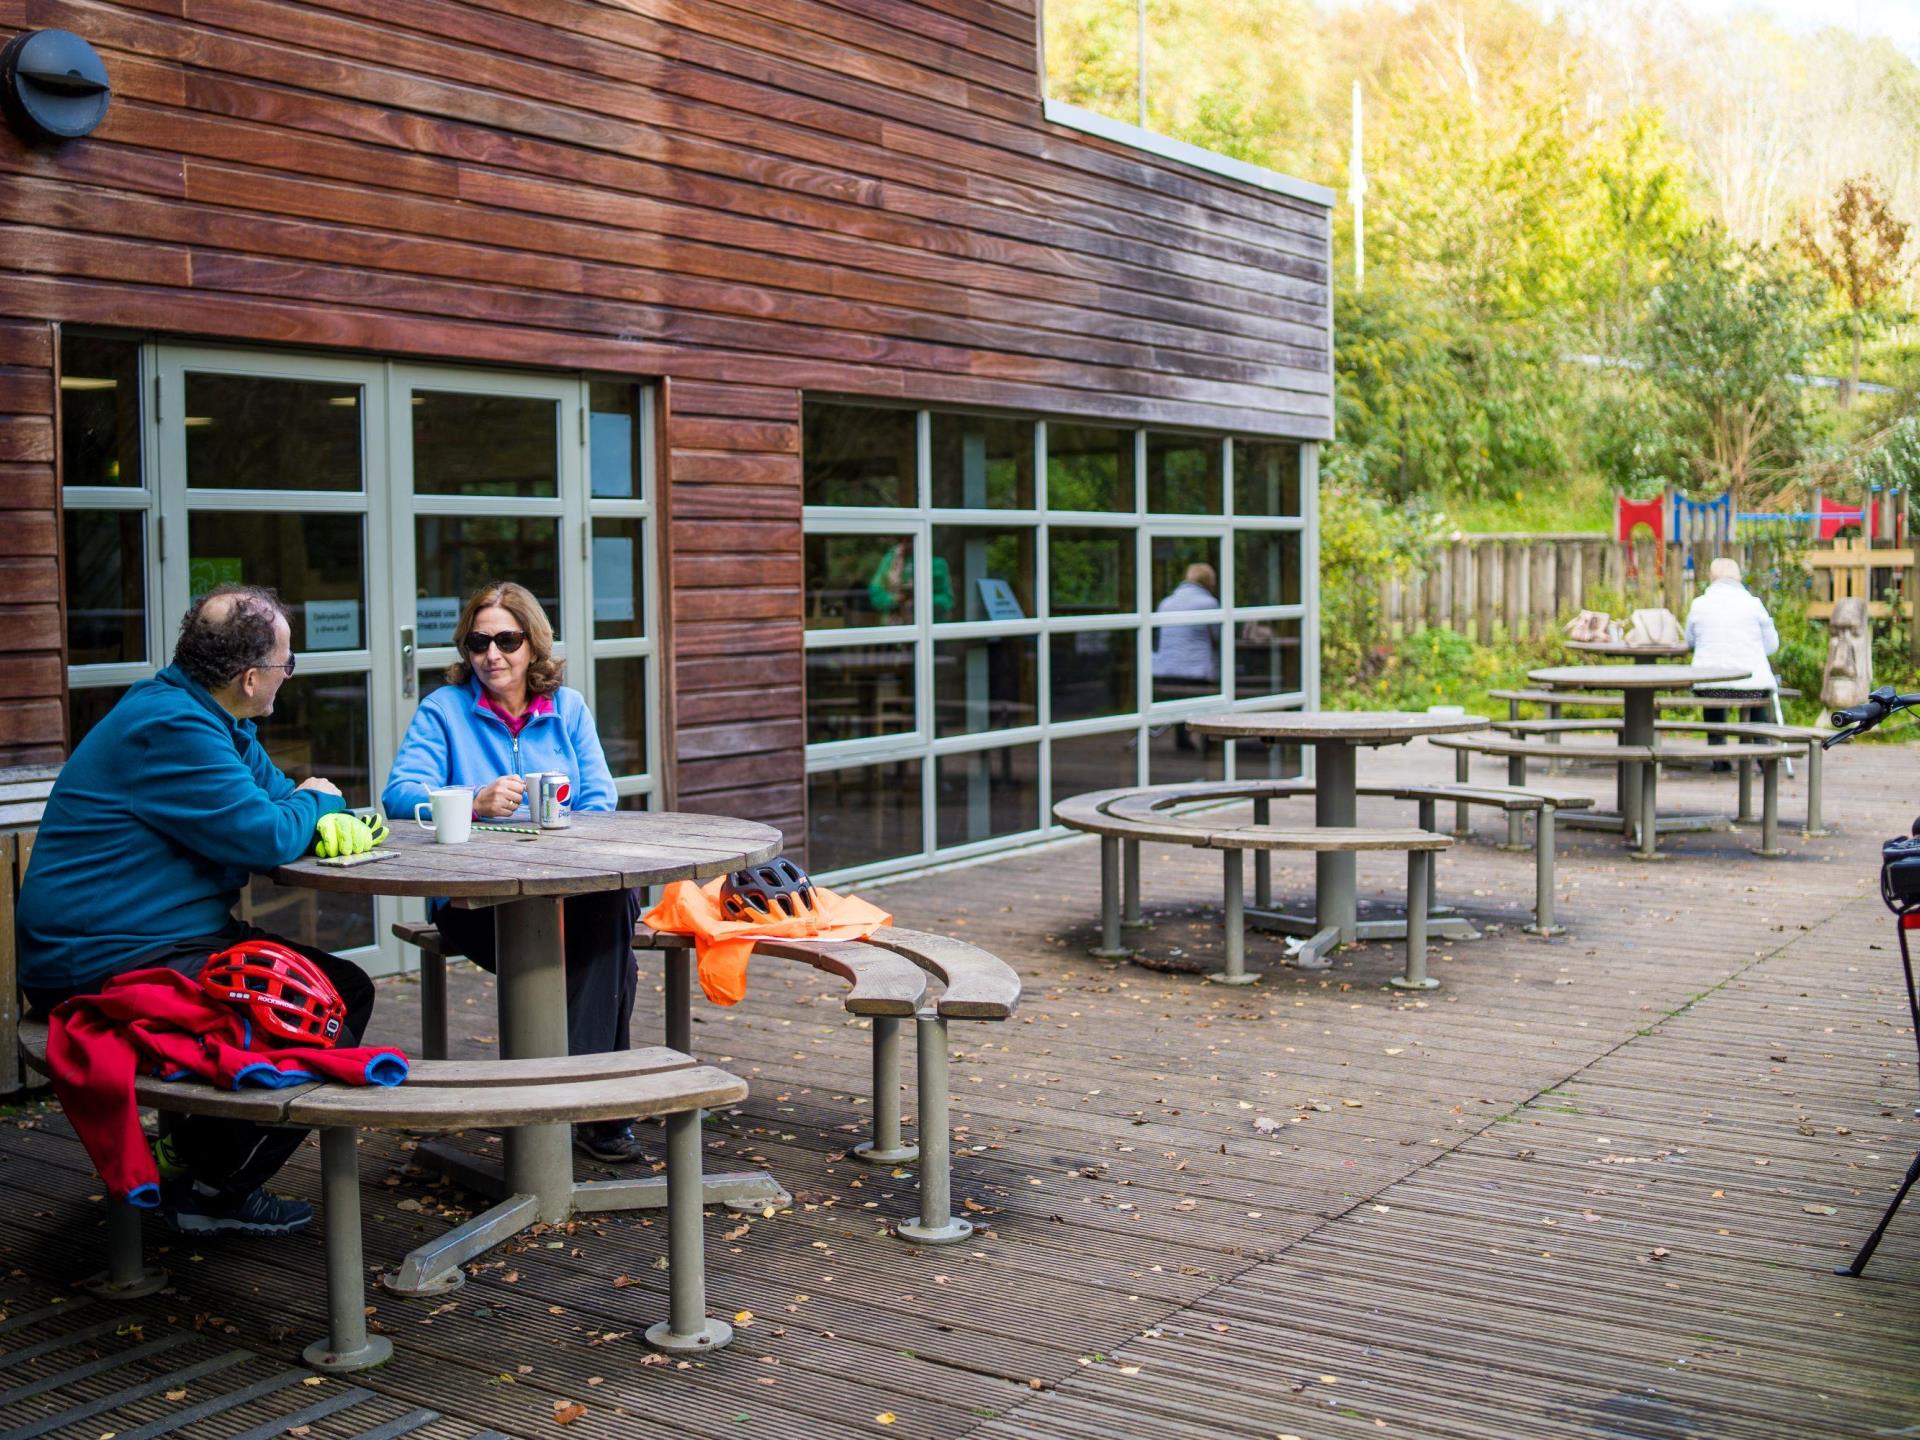 Raven's Cafe at Cwmcarn Forest Visitor Centre